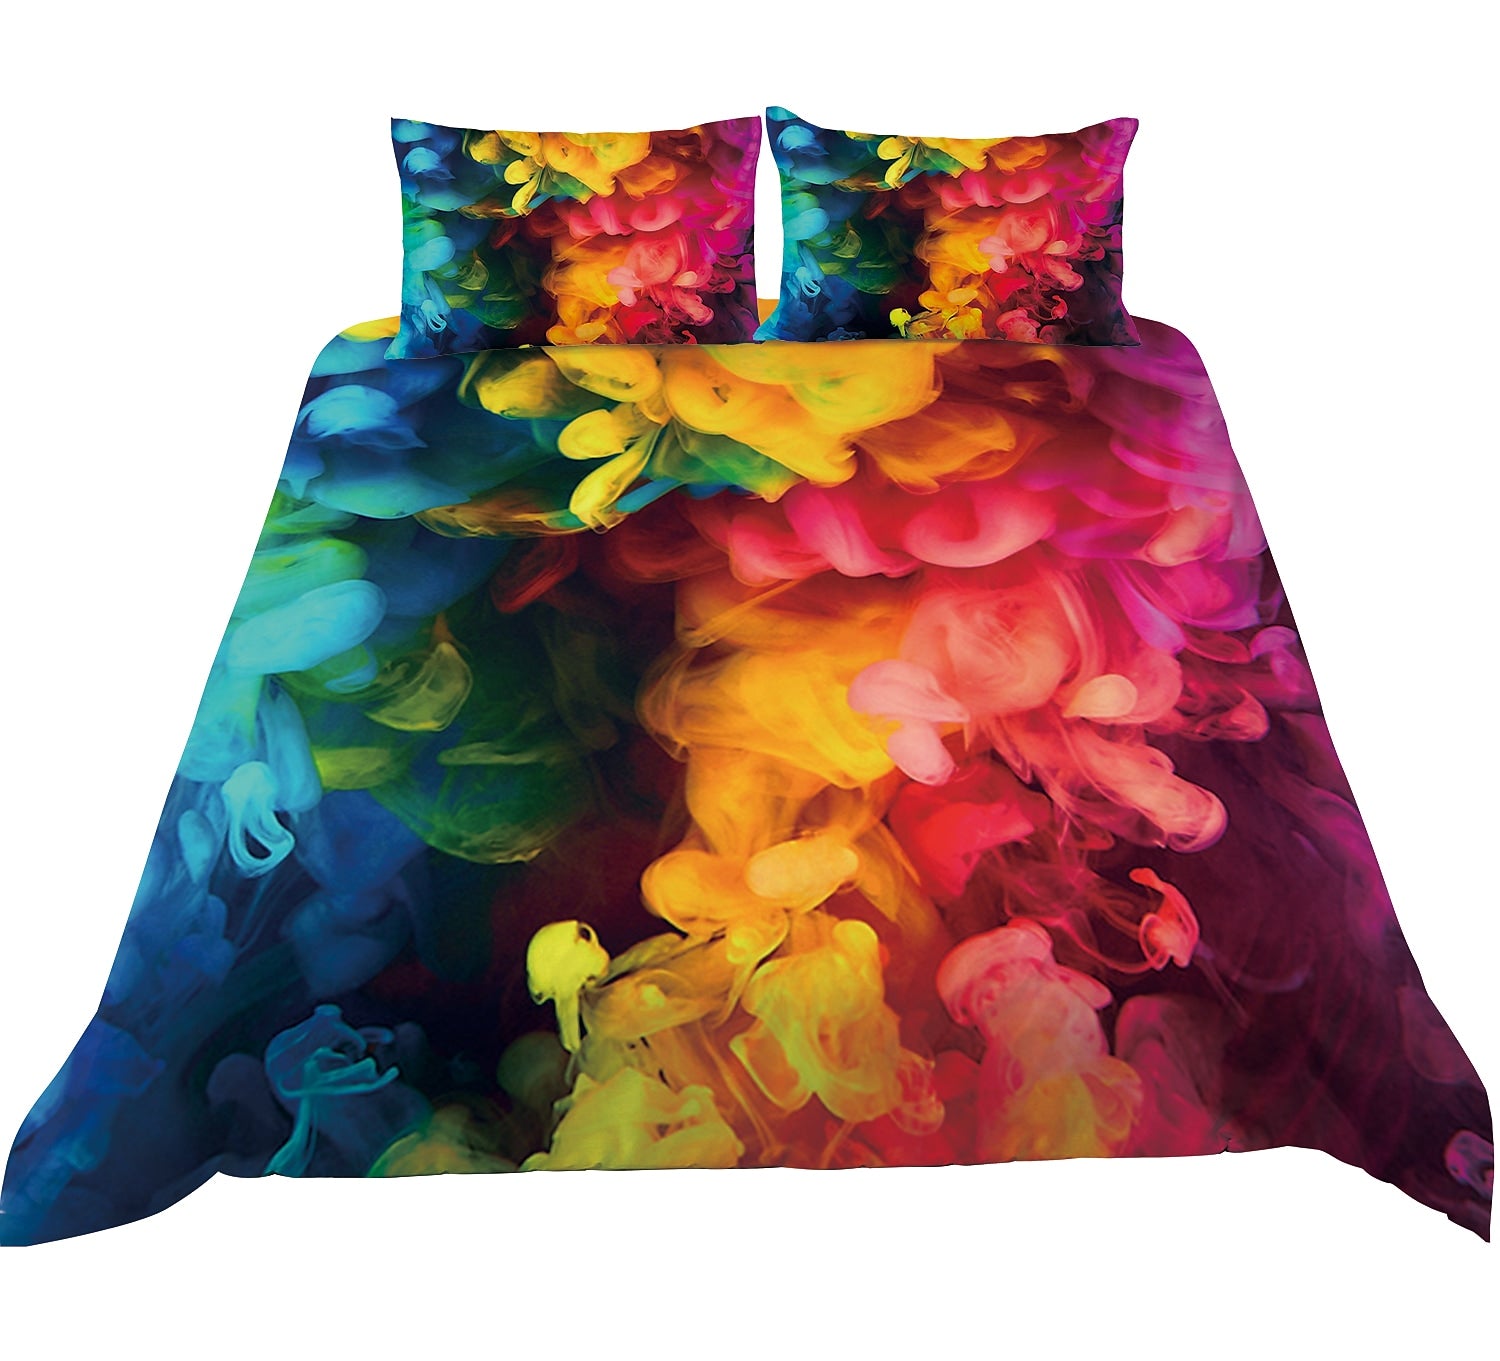 Colorful Smoke Bedding Set Duvet Cover And 2 Pillowcases